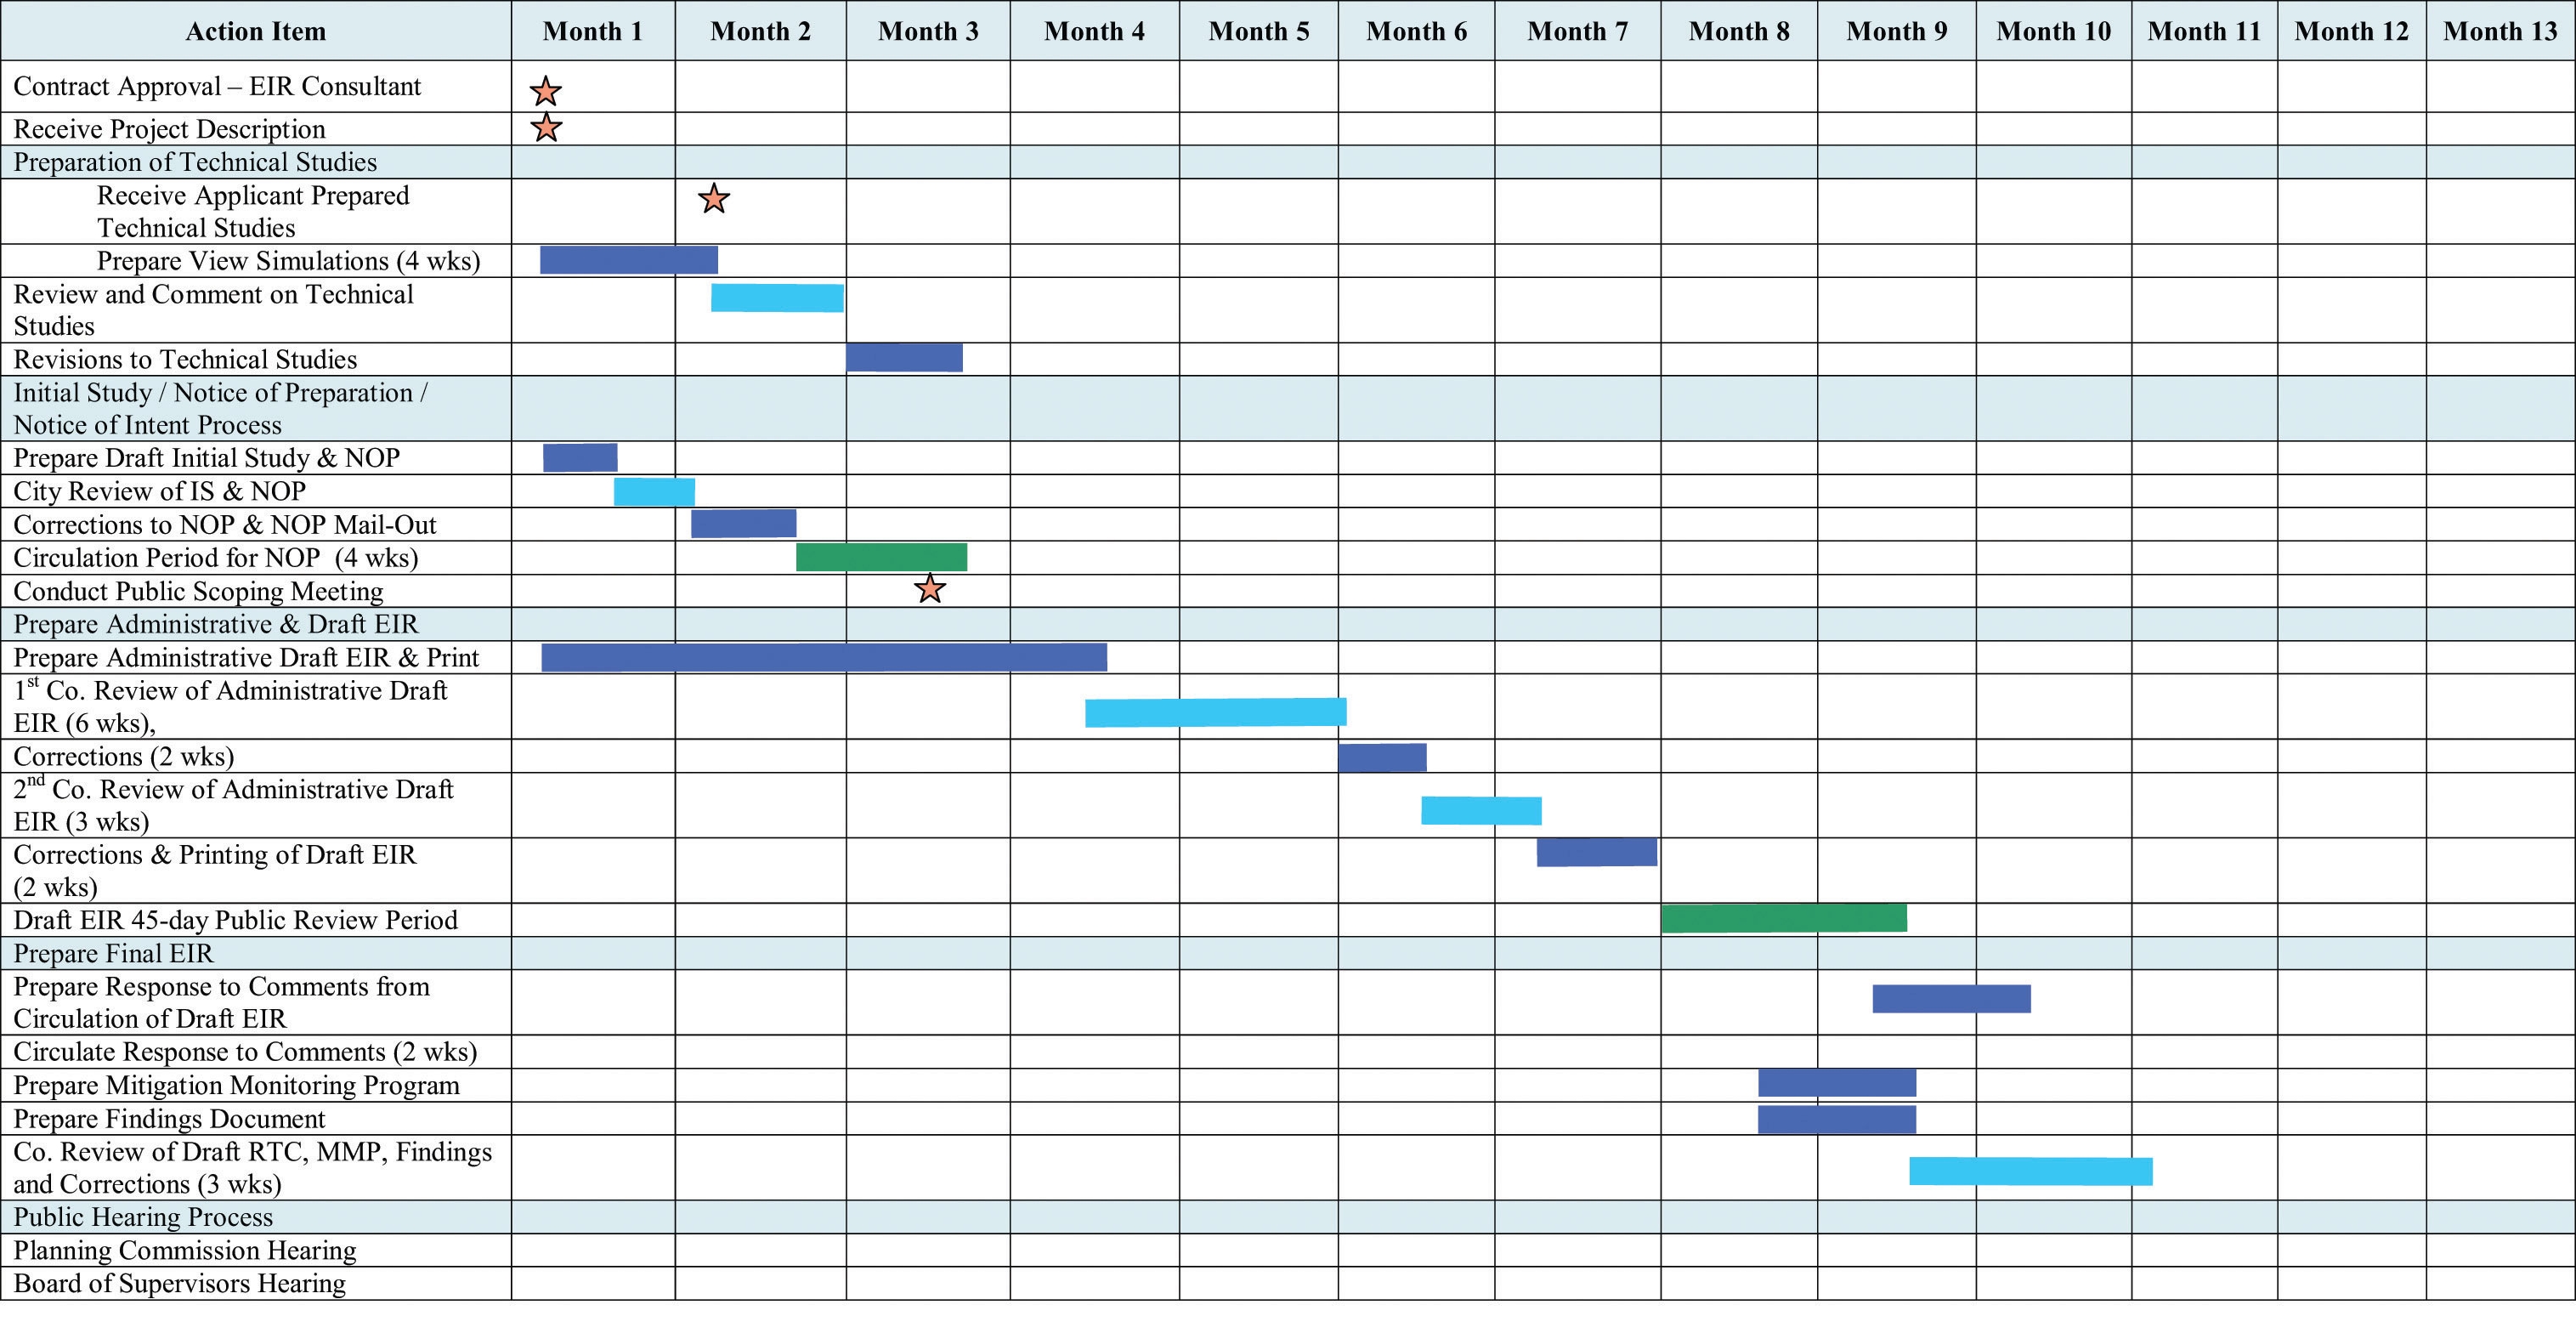 Project Schedule Chart